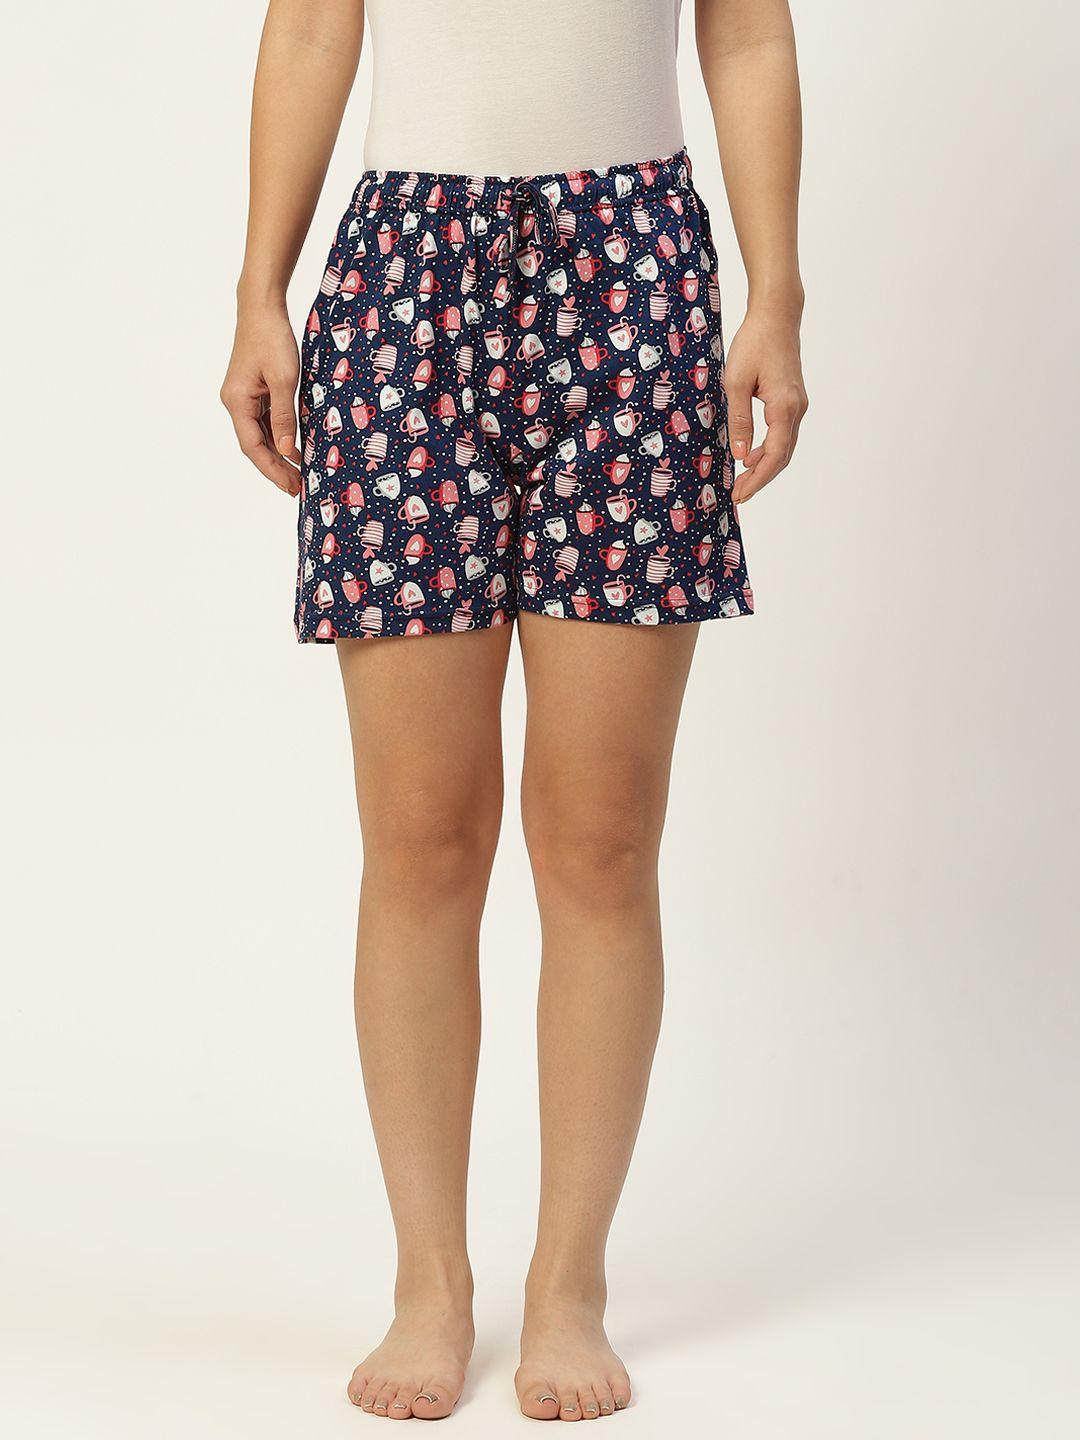 leading-lady-women-navy-blue-&-red-printed-cotton-lounge-shorts